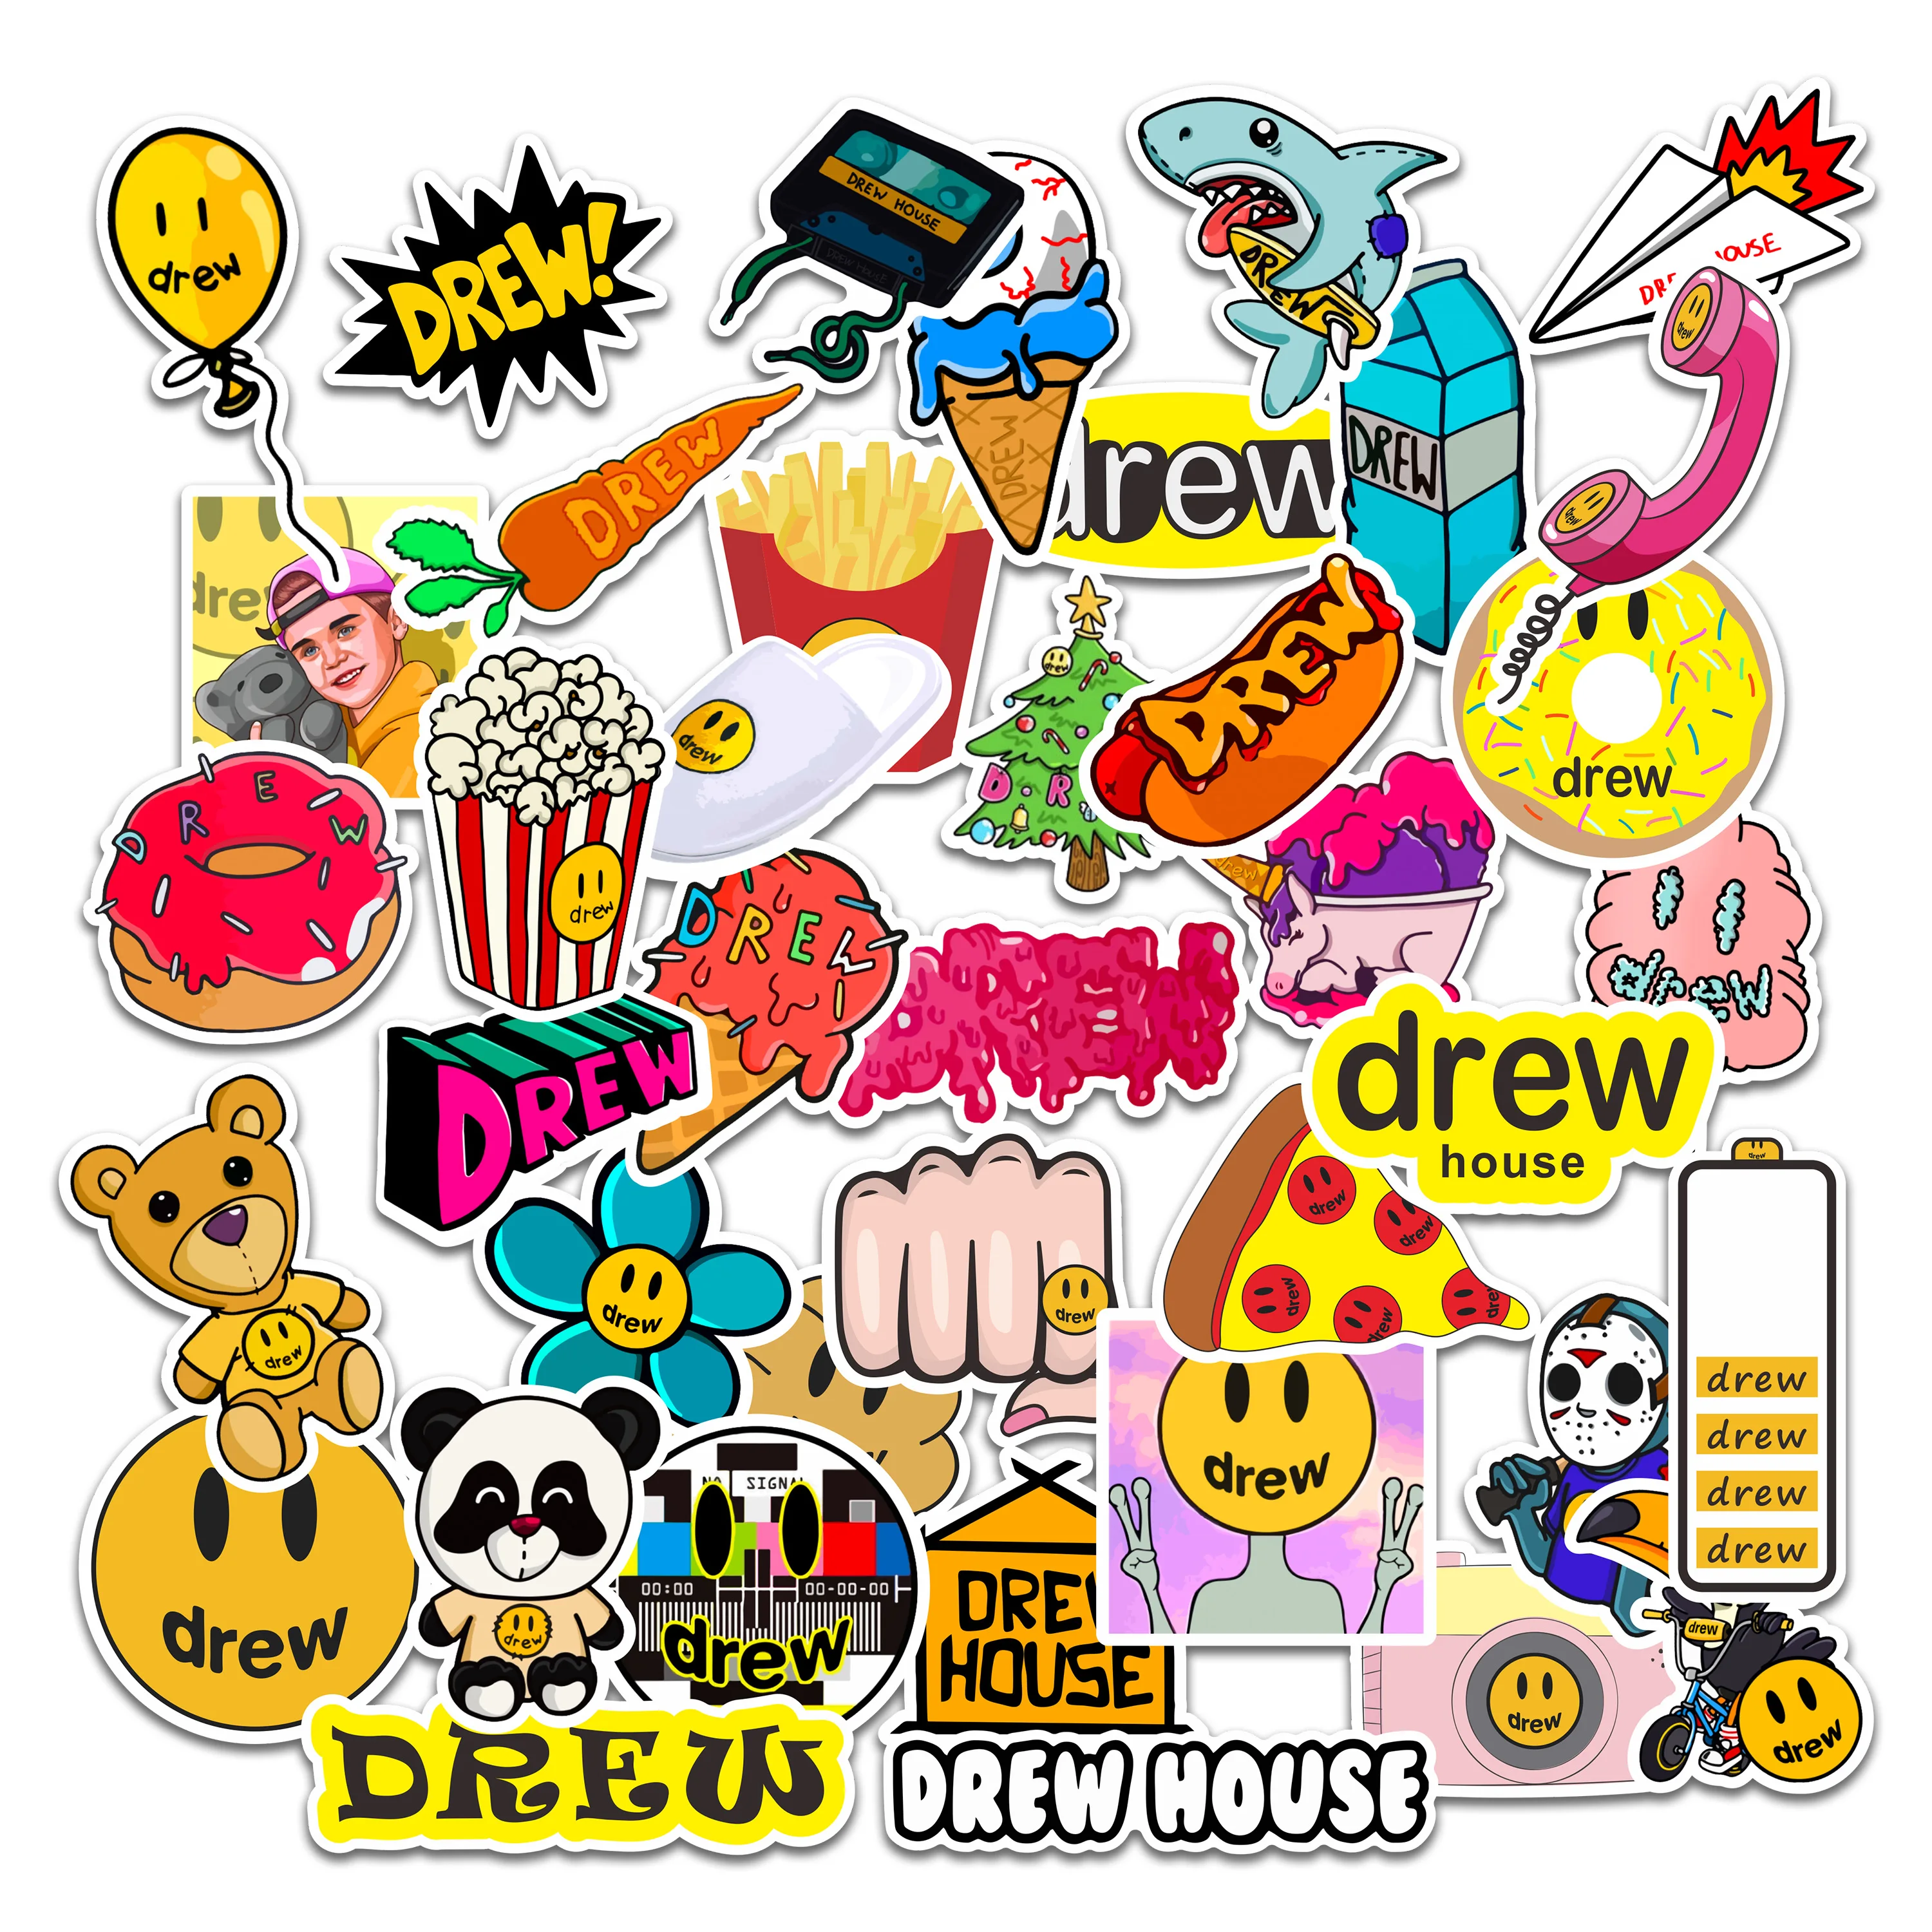 TUHAO Singer Justin Bieber Drewhouse Sticker Pack for Pc Suitcase Laptop Motorcycle Styling Cool Cartoon Stickers 50Pcs 